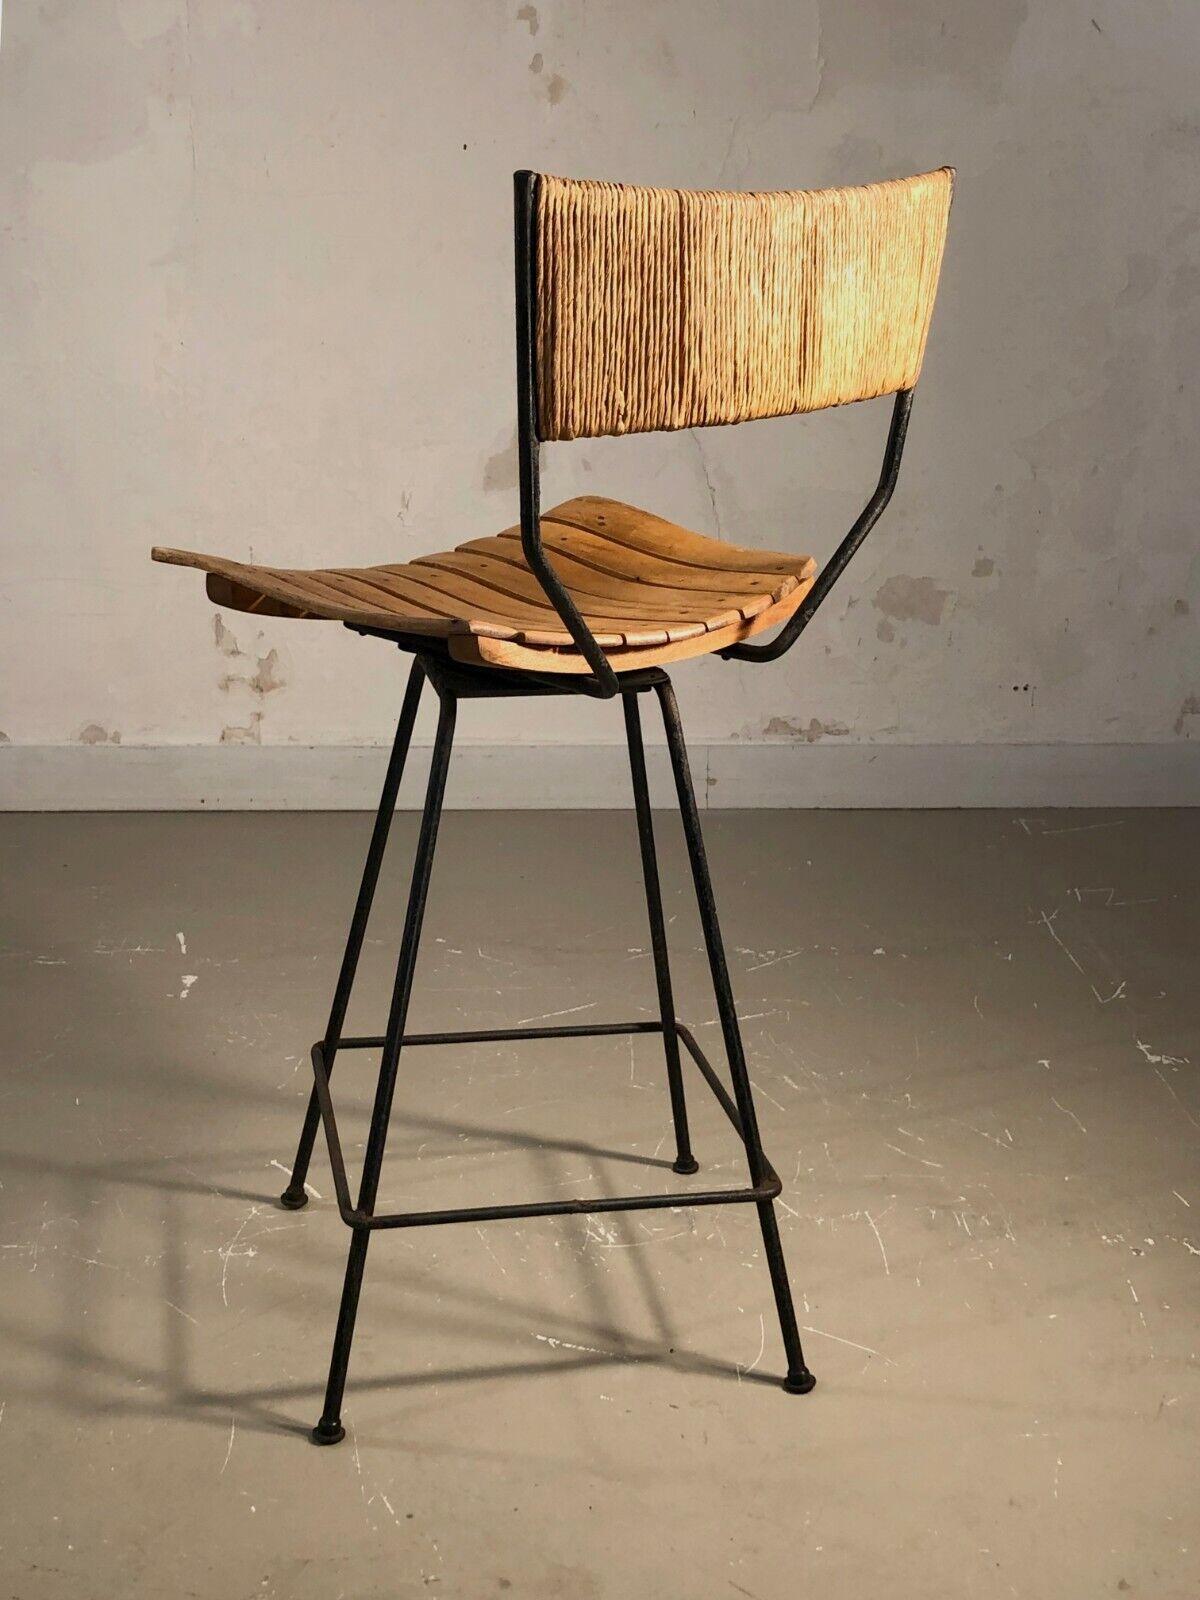 An astonishing high bar chair with adjustable seat, Modernist, Free Form, Dansk, Scandinavian, black lacquered wrought iron structures, swivel seat on its axis in strips of folded wood, straw back, by Arthur Umanoff, produced by Raymor, USA